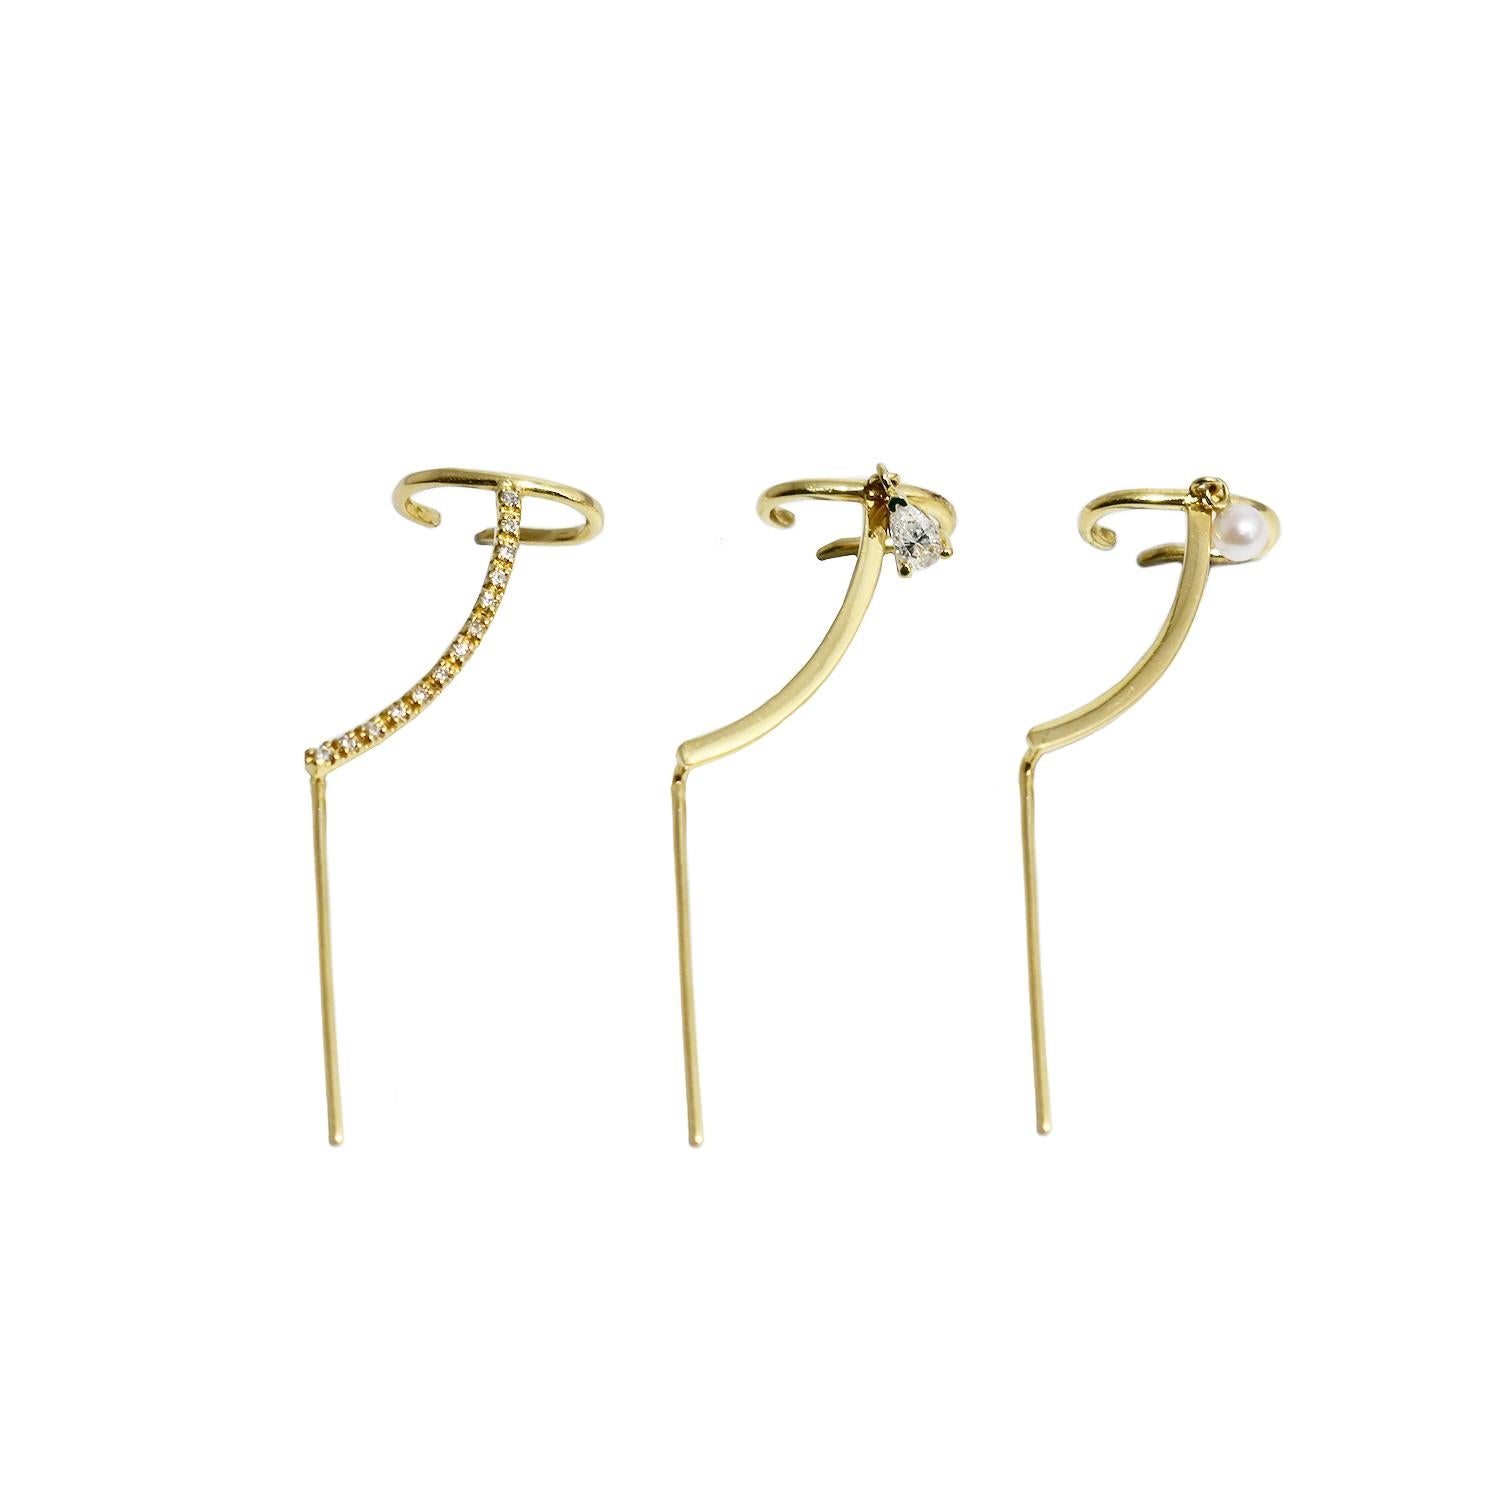 The Mono Cuff Needle Gold Earring is a statement earring in solid 14k gold. It subtle curve follows the outline of your ear finishing in a comfortable cuff. 

How to wear it: 

Thread the needle end of the earring through the ear lobe piercing and